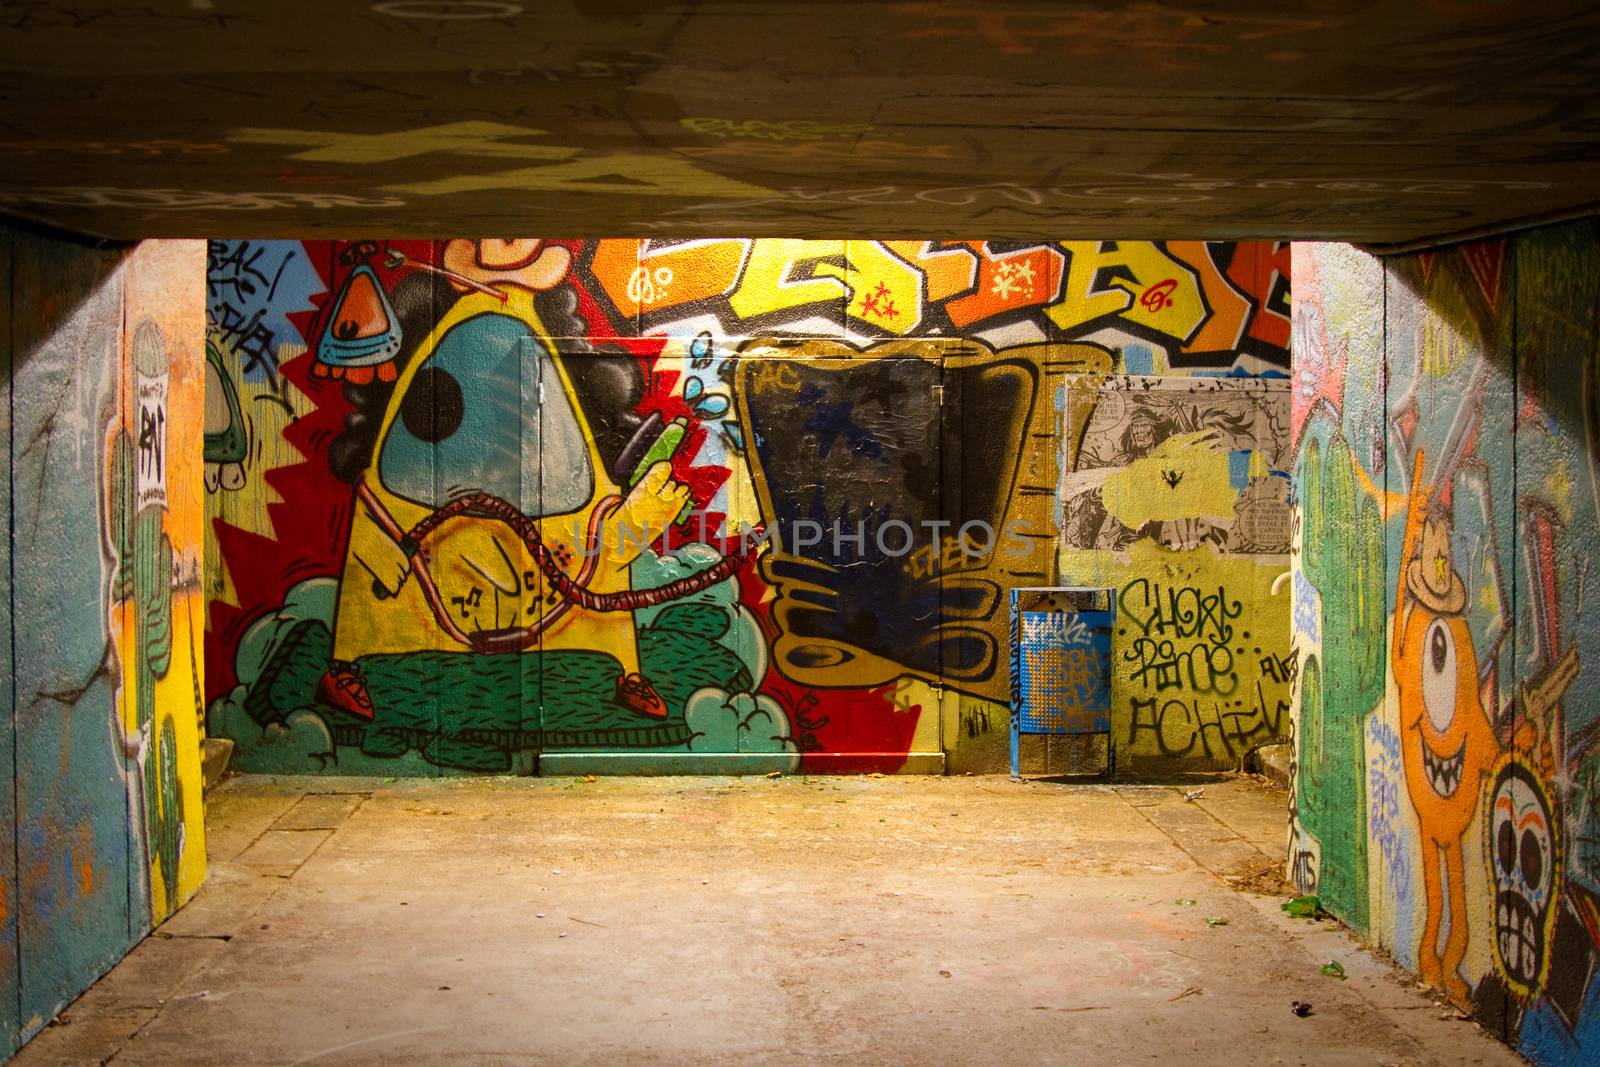 Graffiti in Underpass by samULvisuals